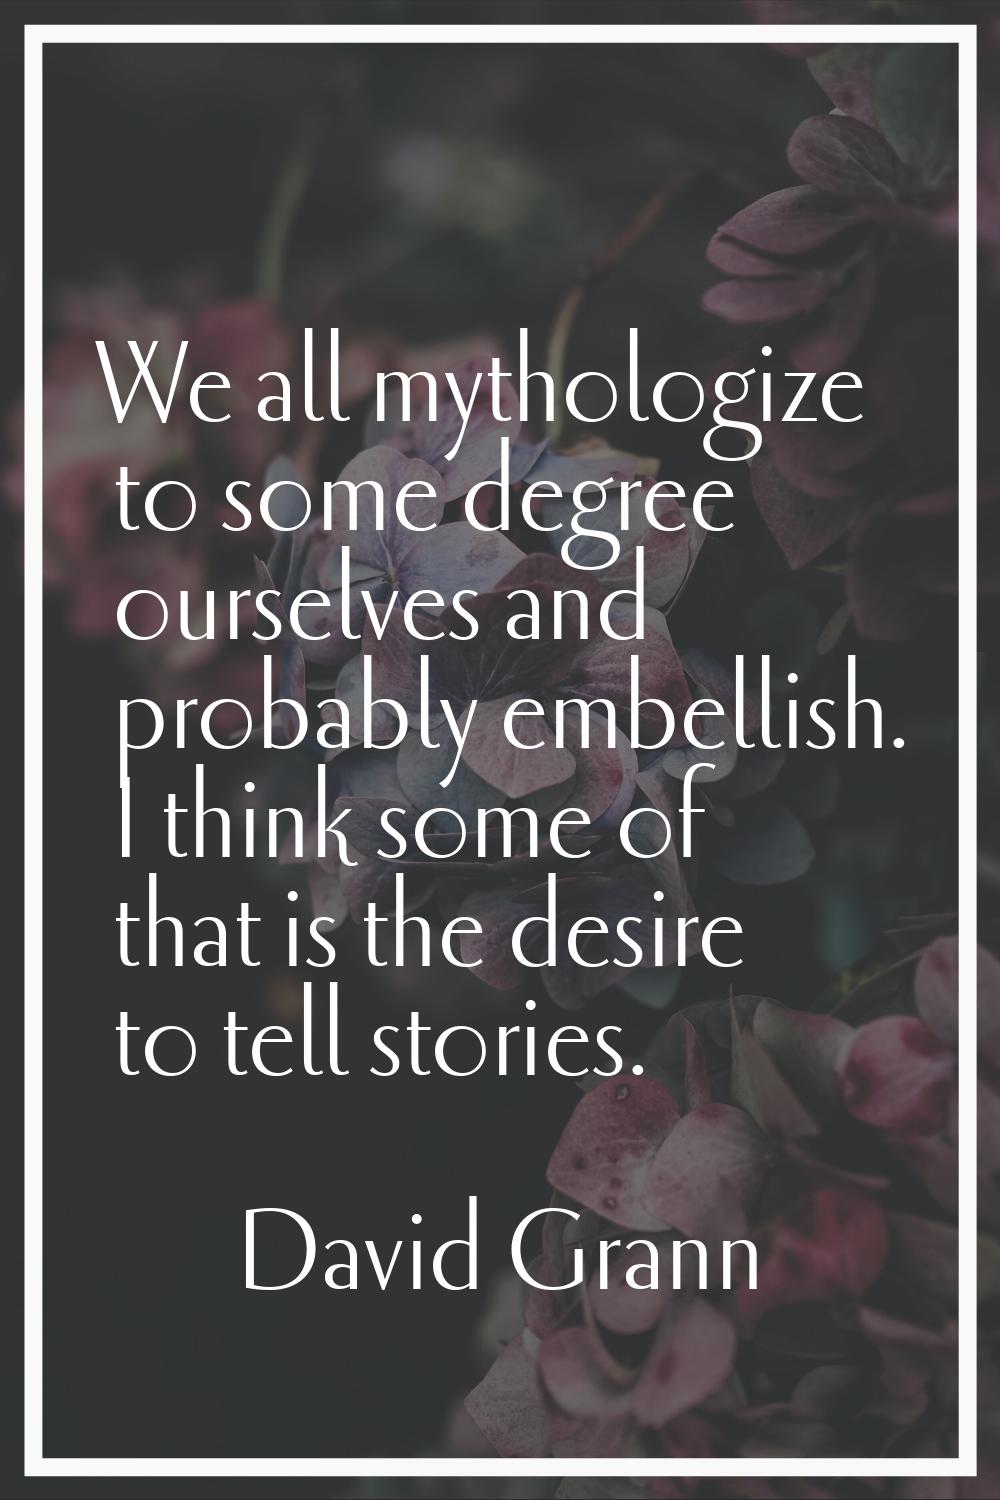 We all mythologize to some degree ourselves and probably embellish. I think some of that is the des